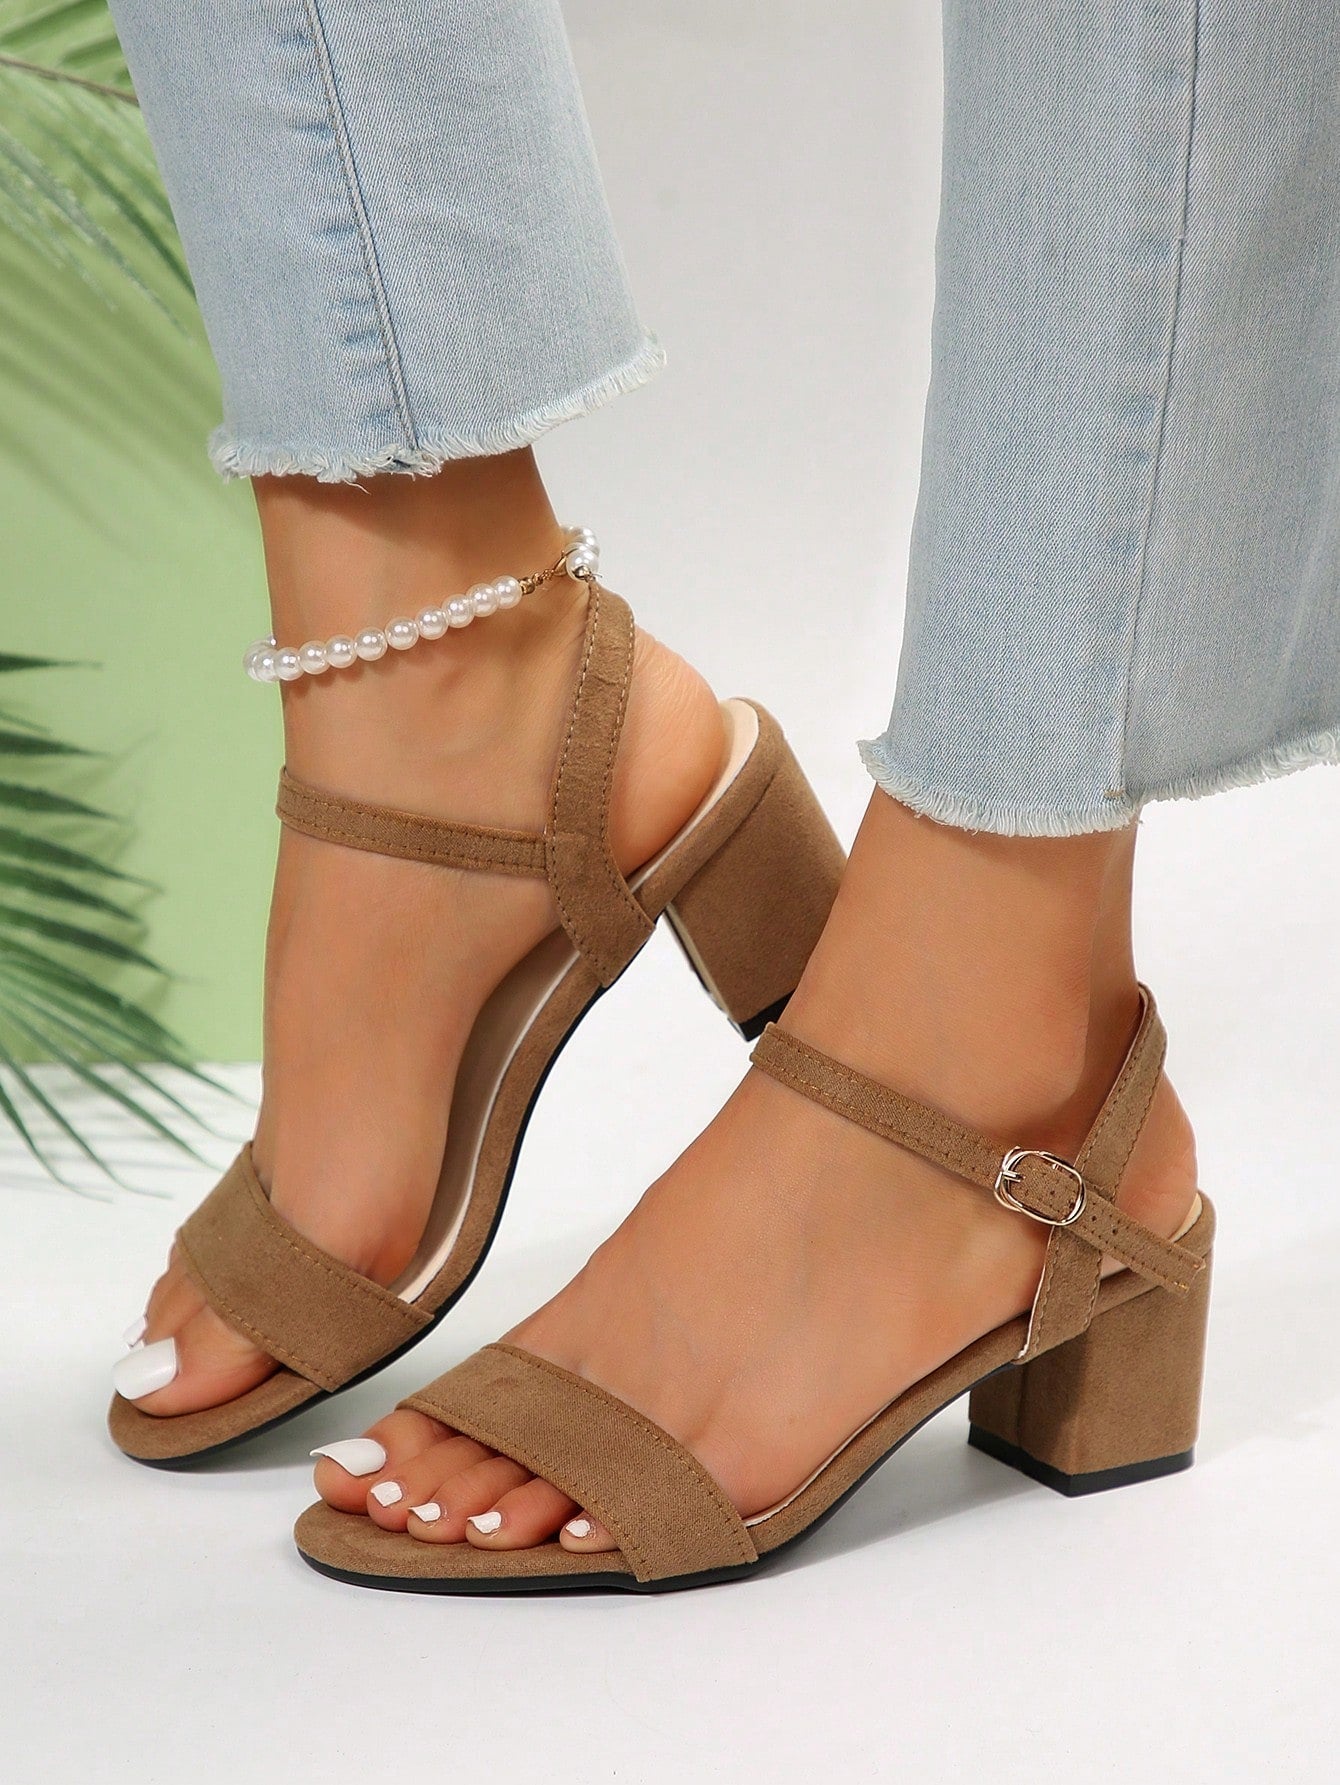 New Arrival Chunky Heeled Sandals For Women, Peep Toe Ankle Strap Summer Shoes